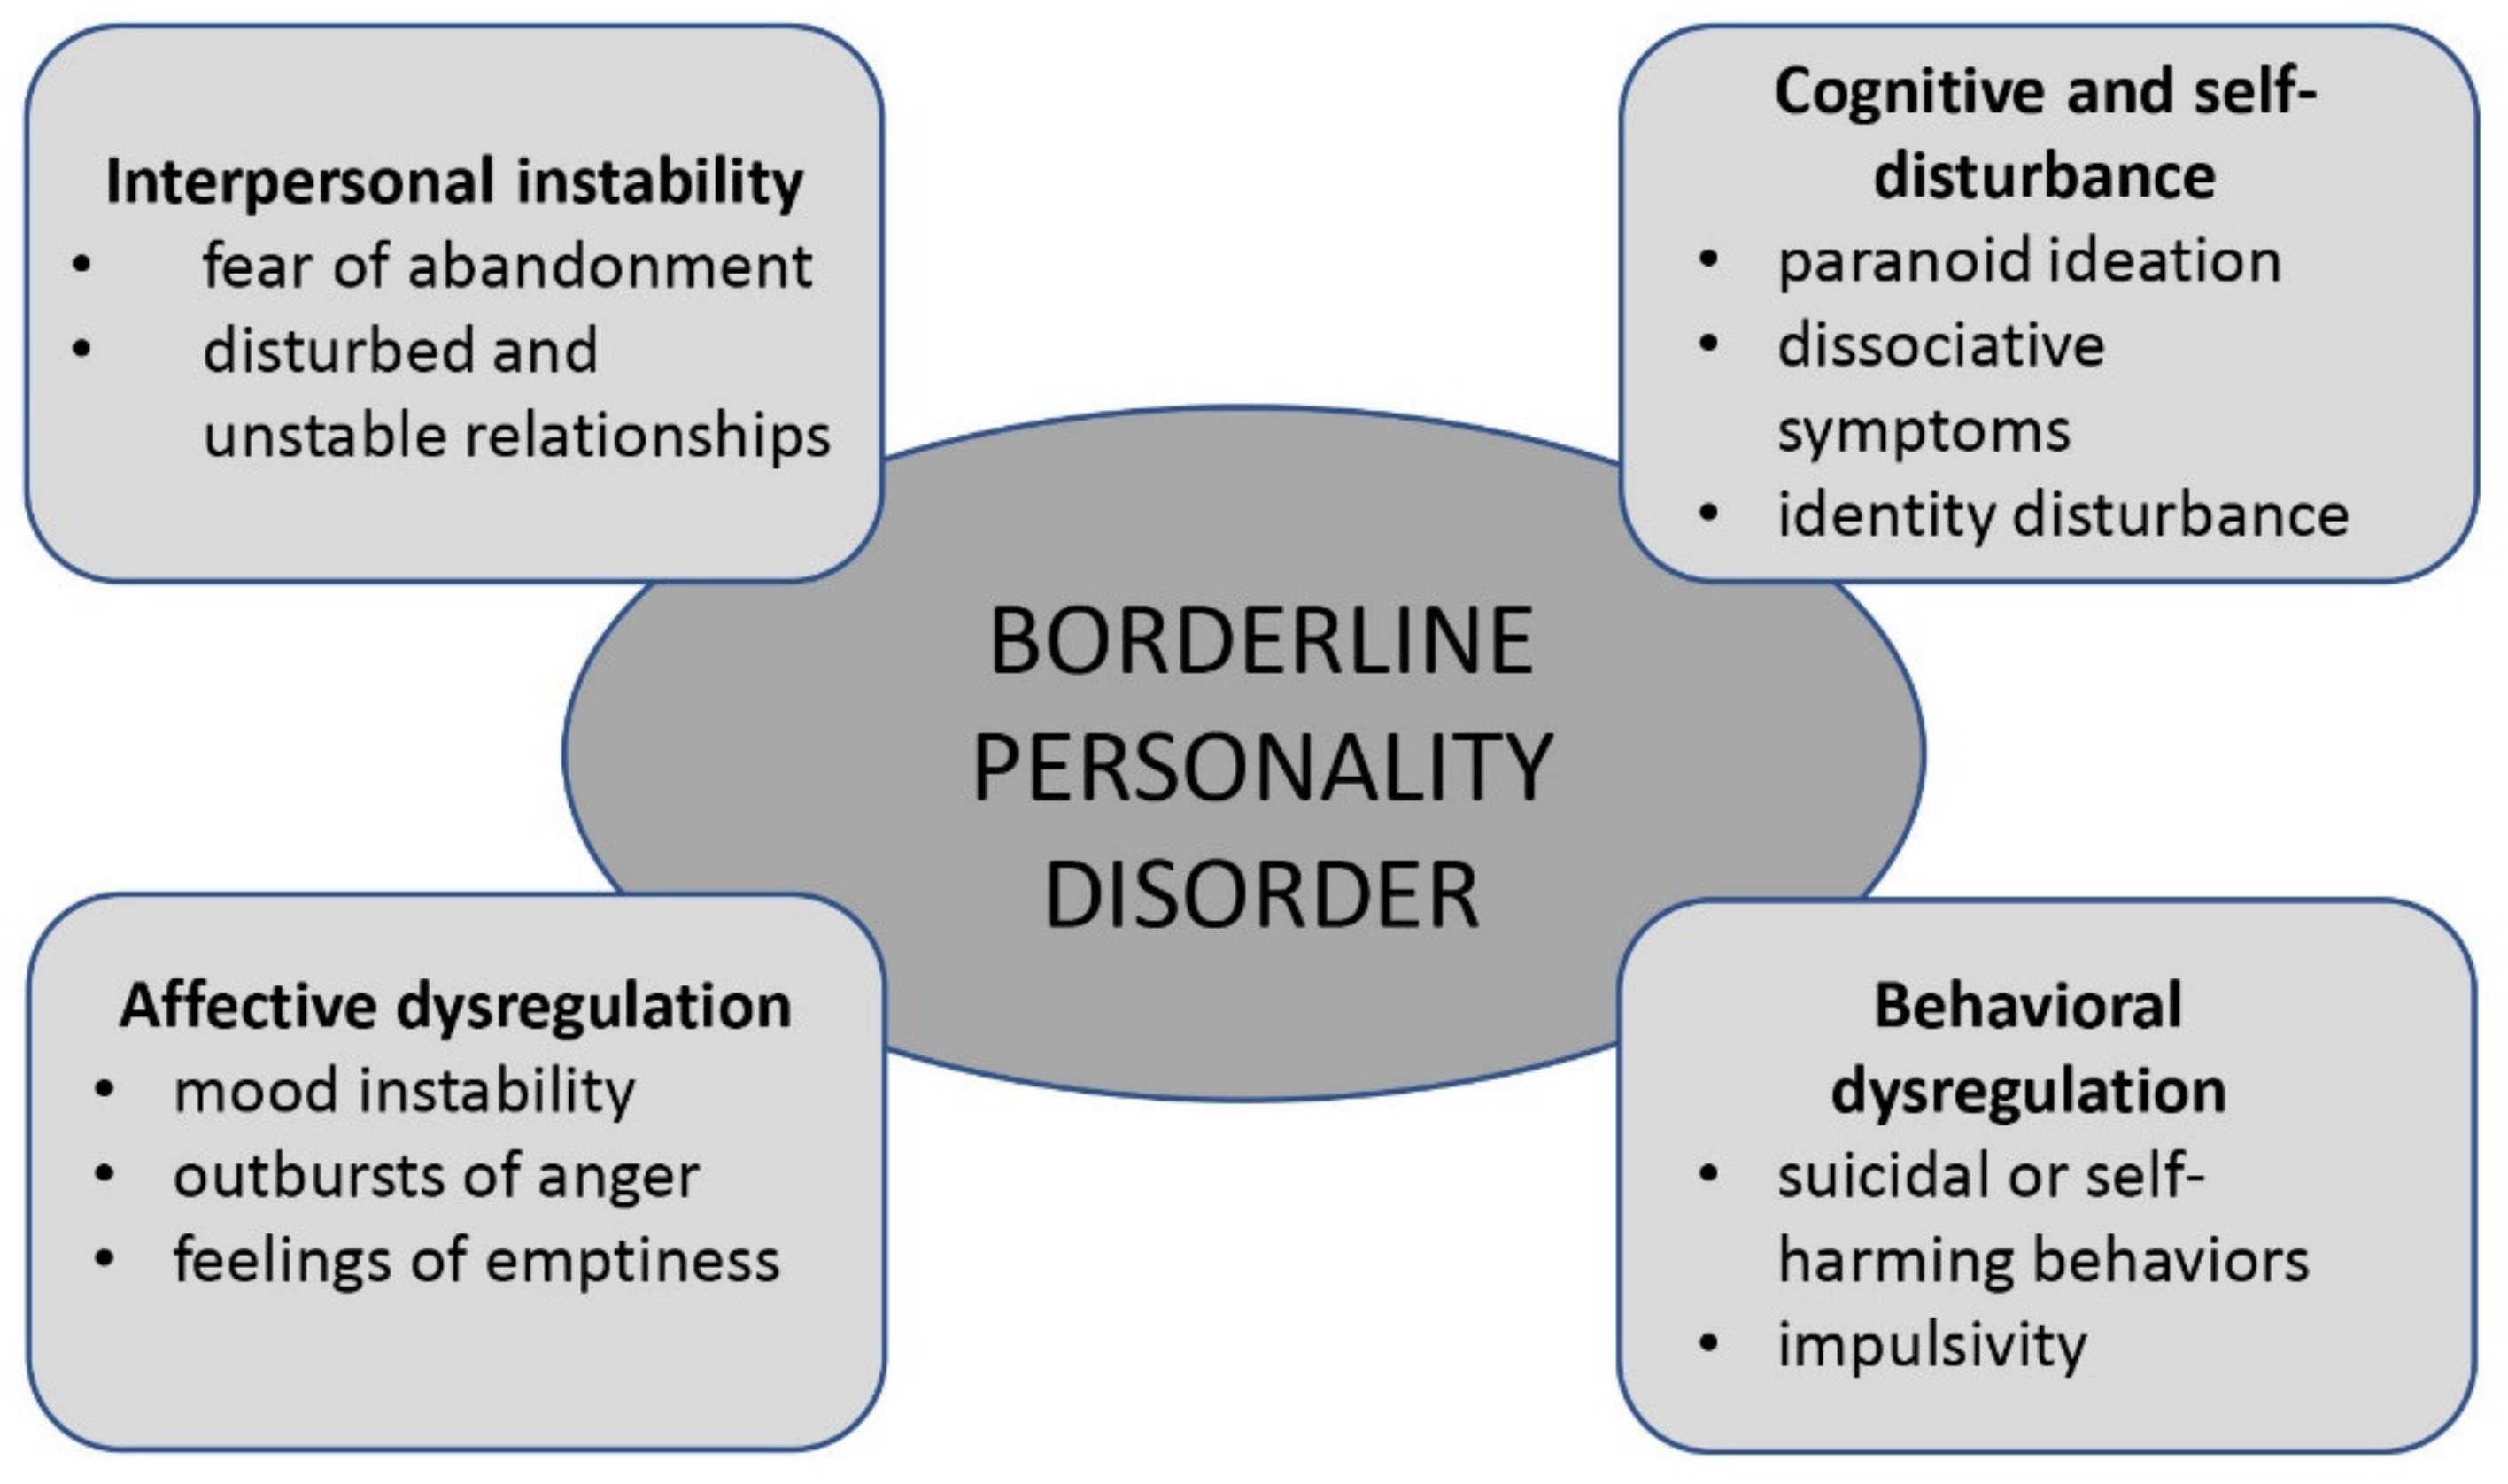 Borderline personality disorder: definition, causes, symptoms